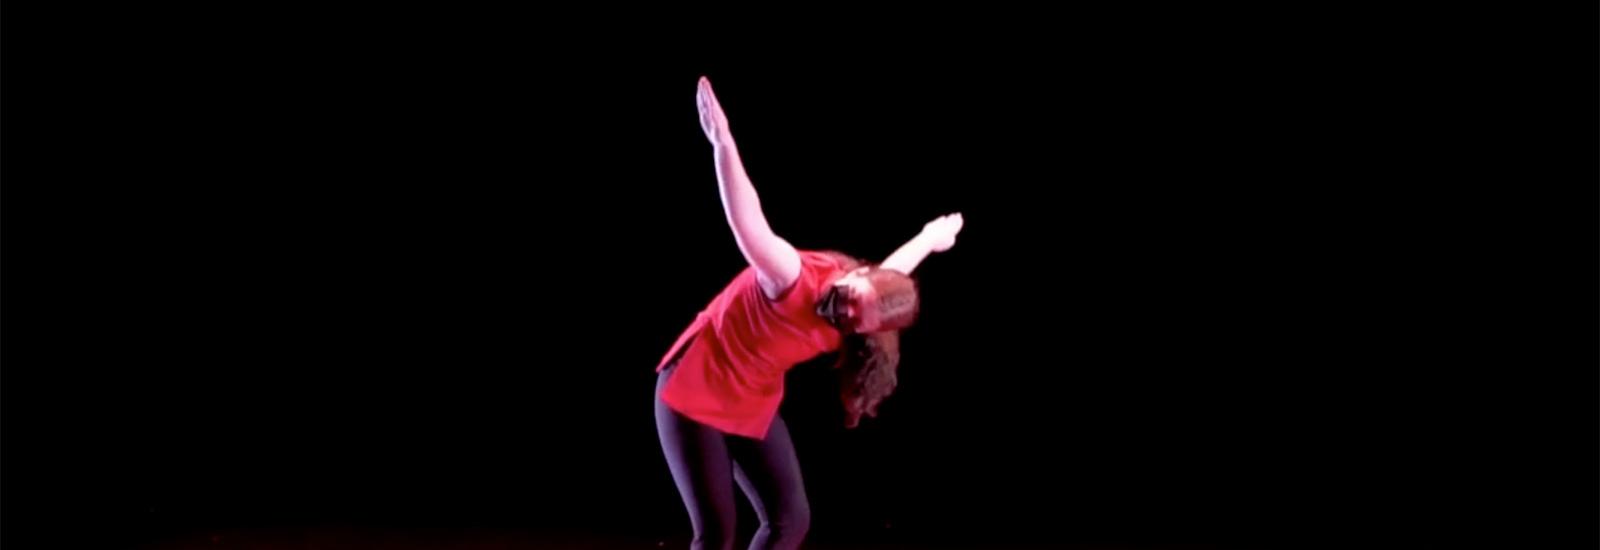 A dancer poses on a red floor in front of a black background.